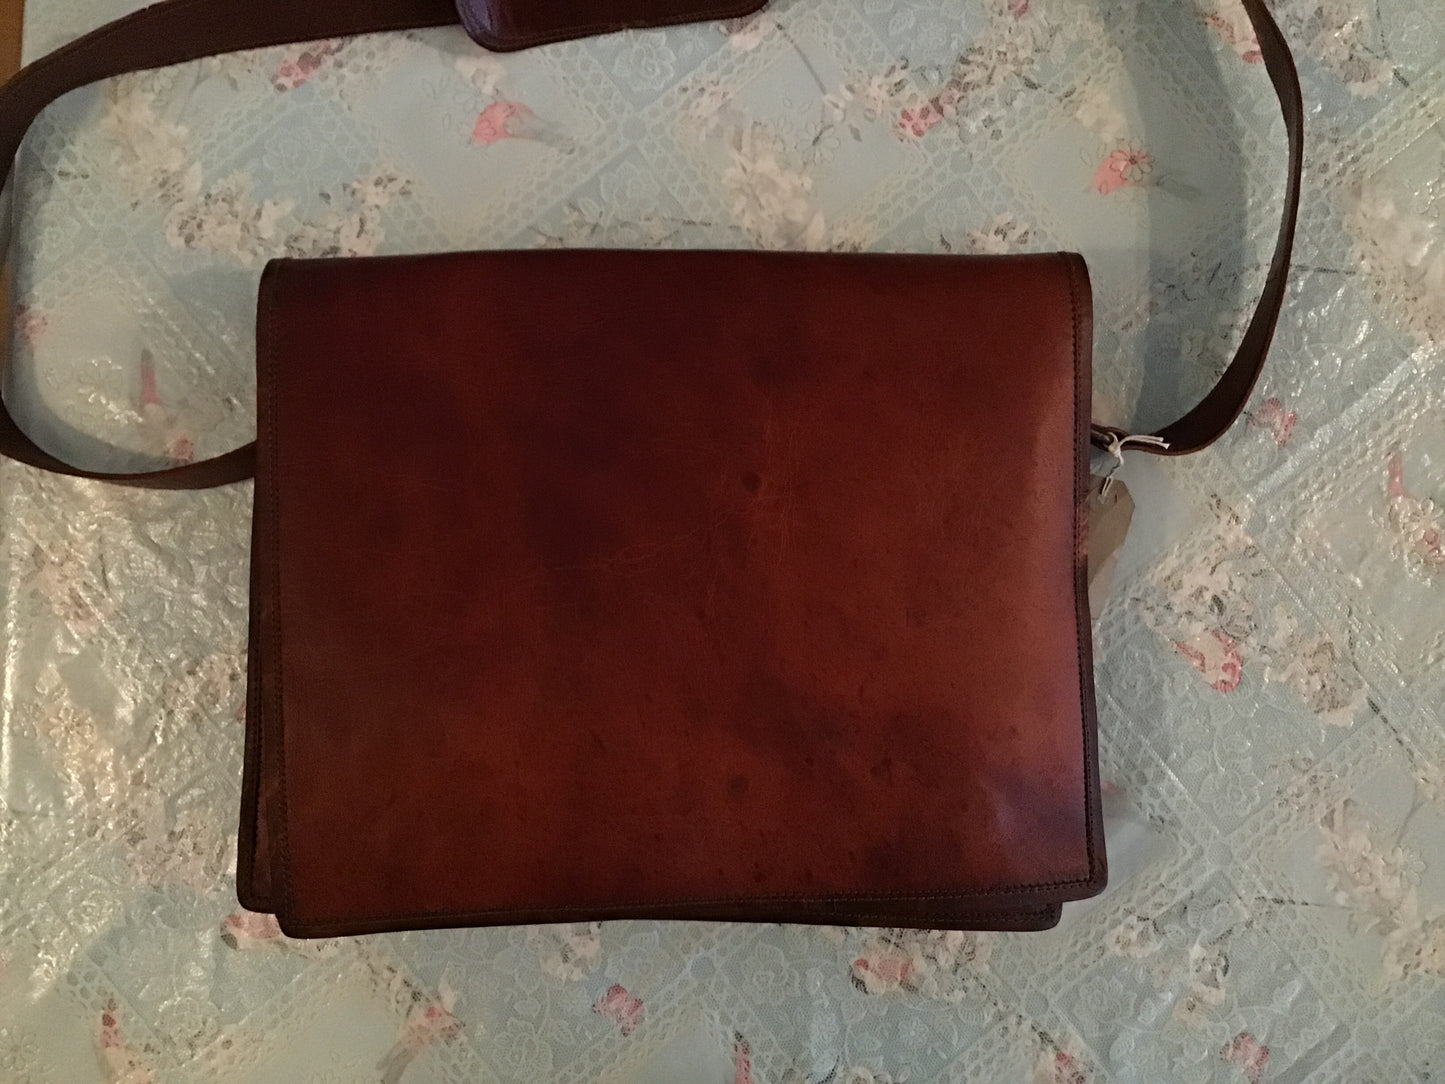 Large leather courier bag